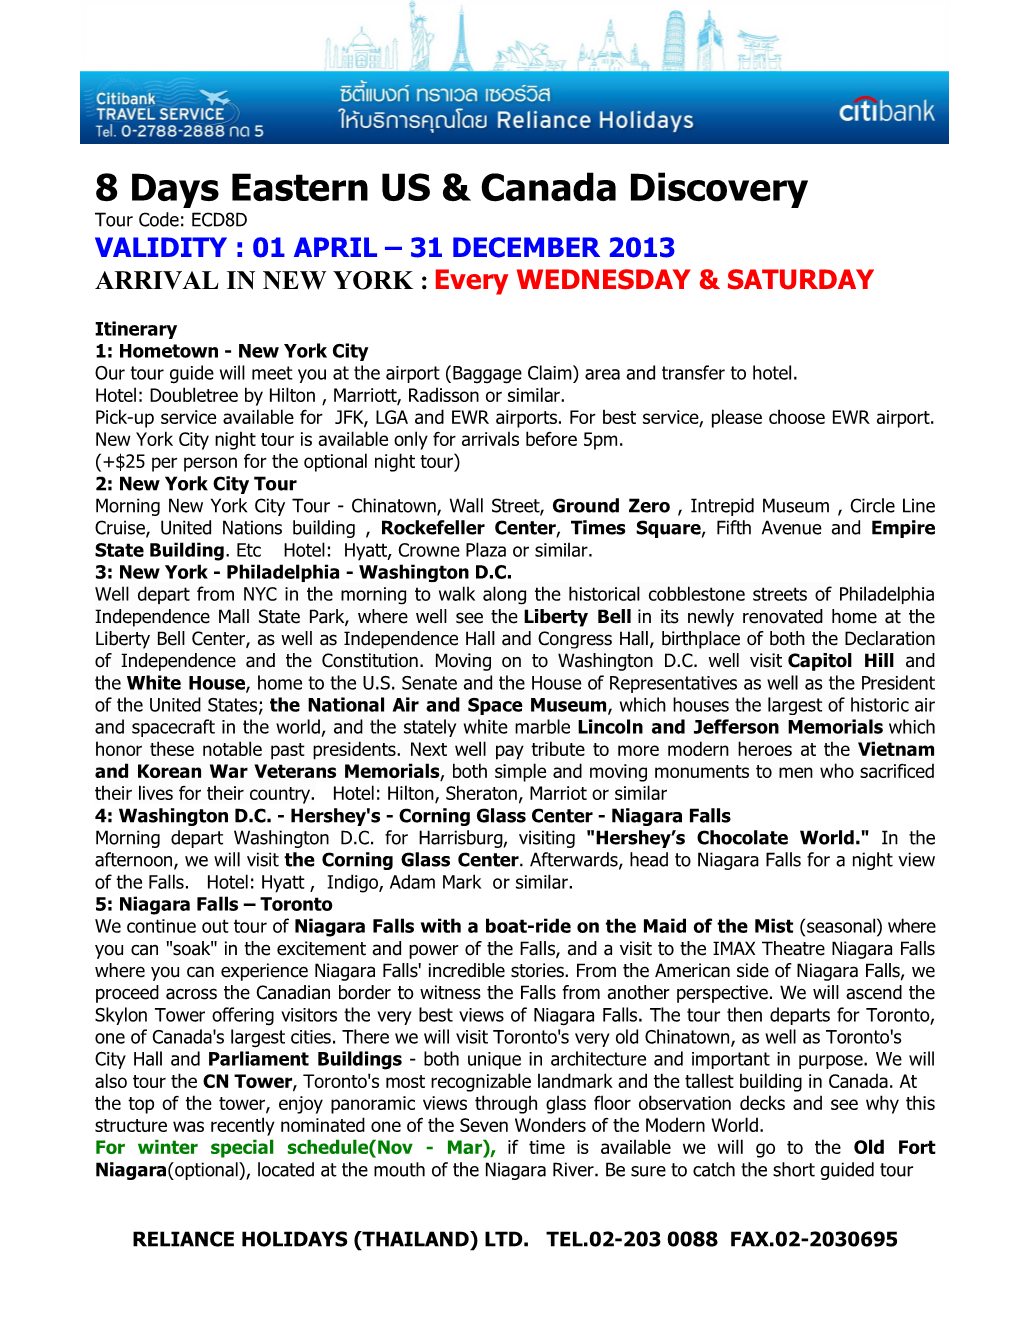 8 Days Eastern US & Canada Discovery